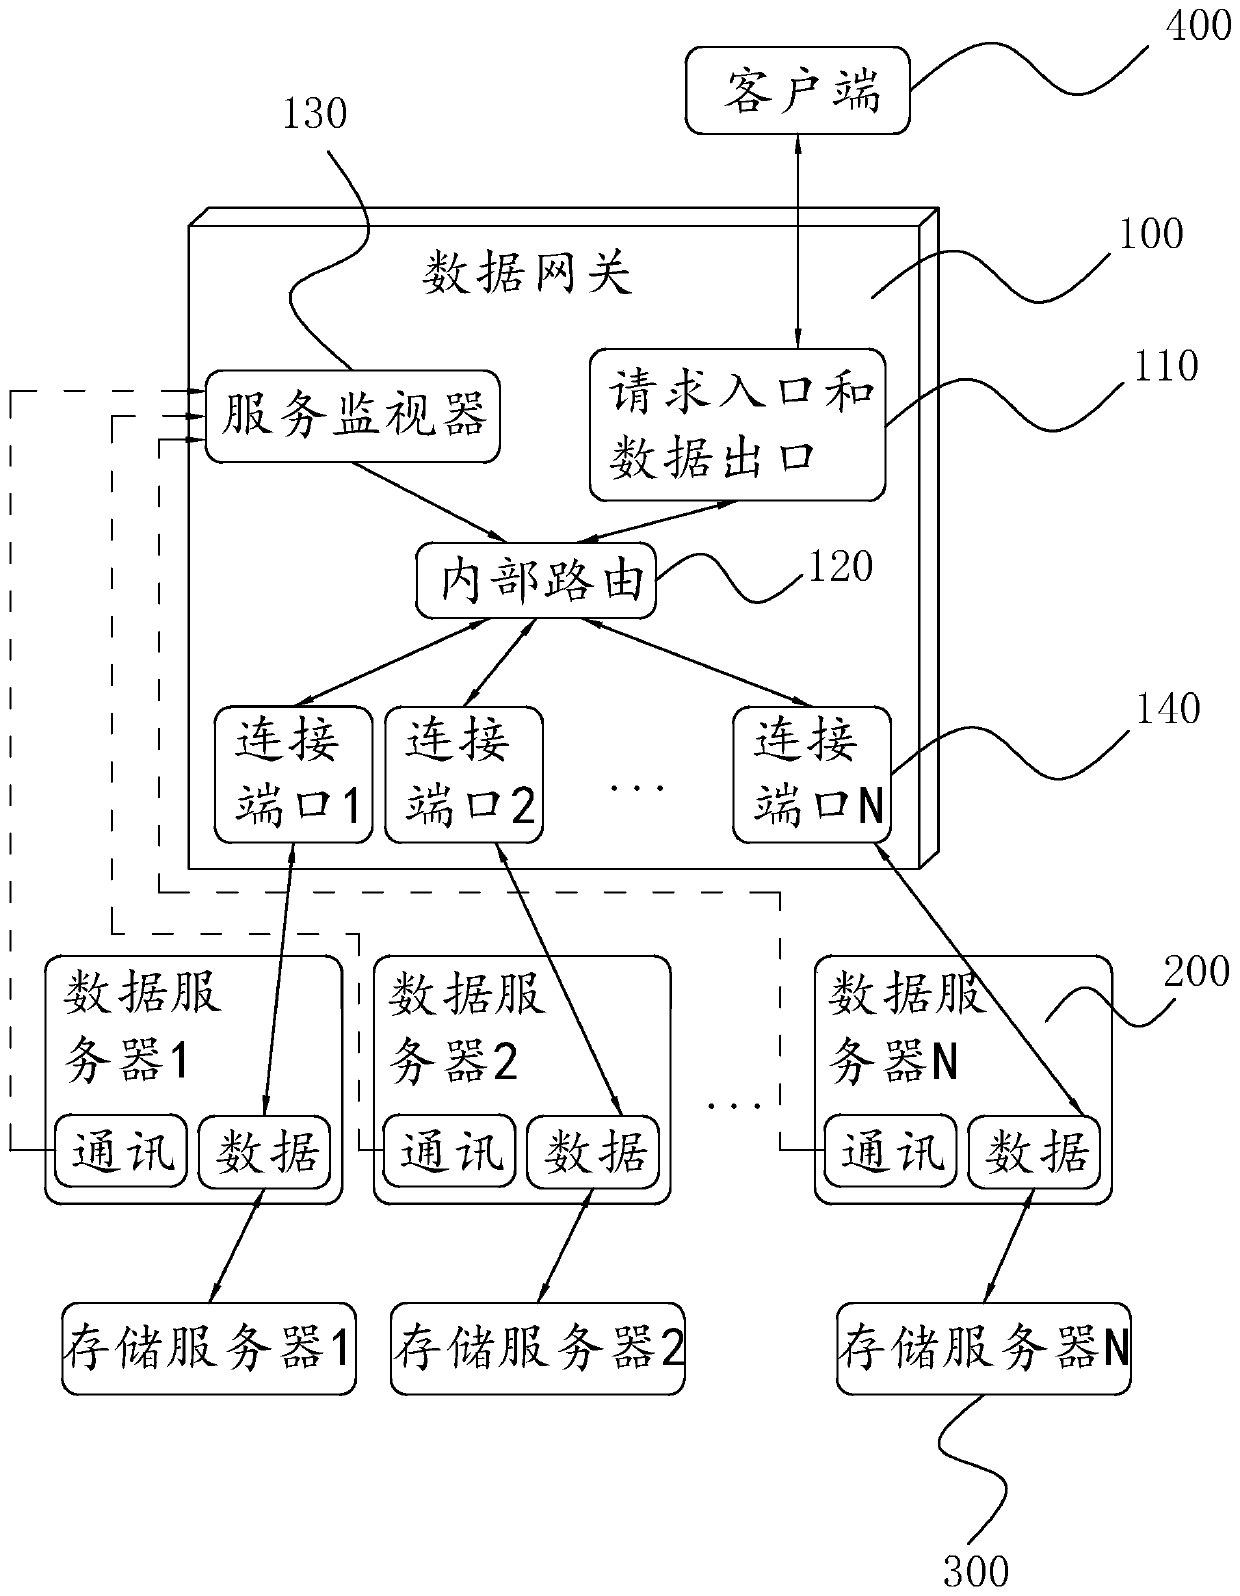 Distributed storage grid meteorological data reading method and system